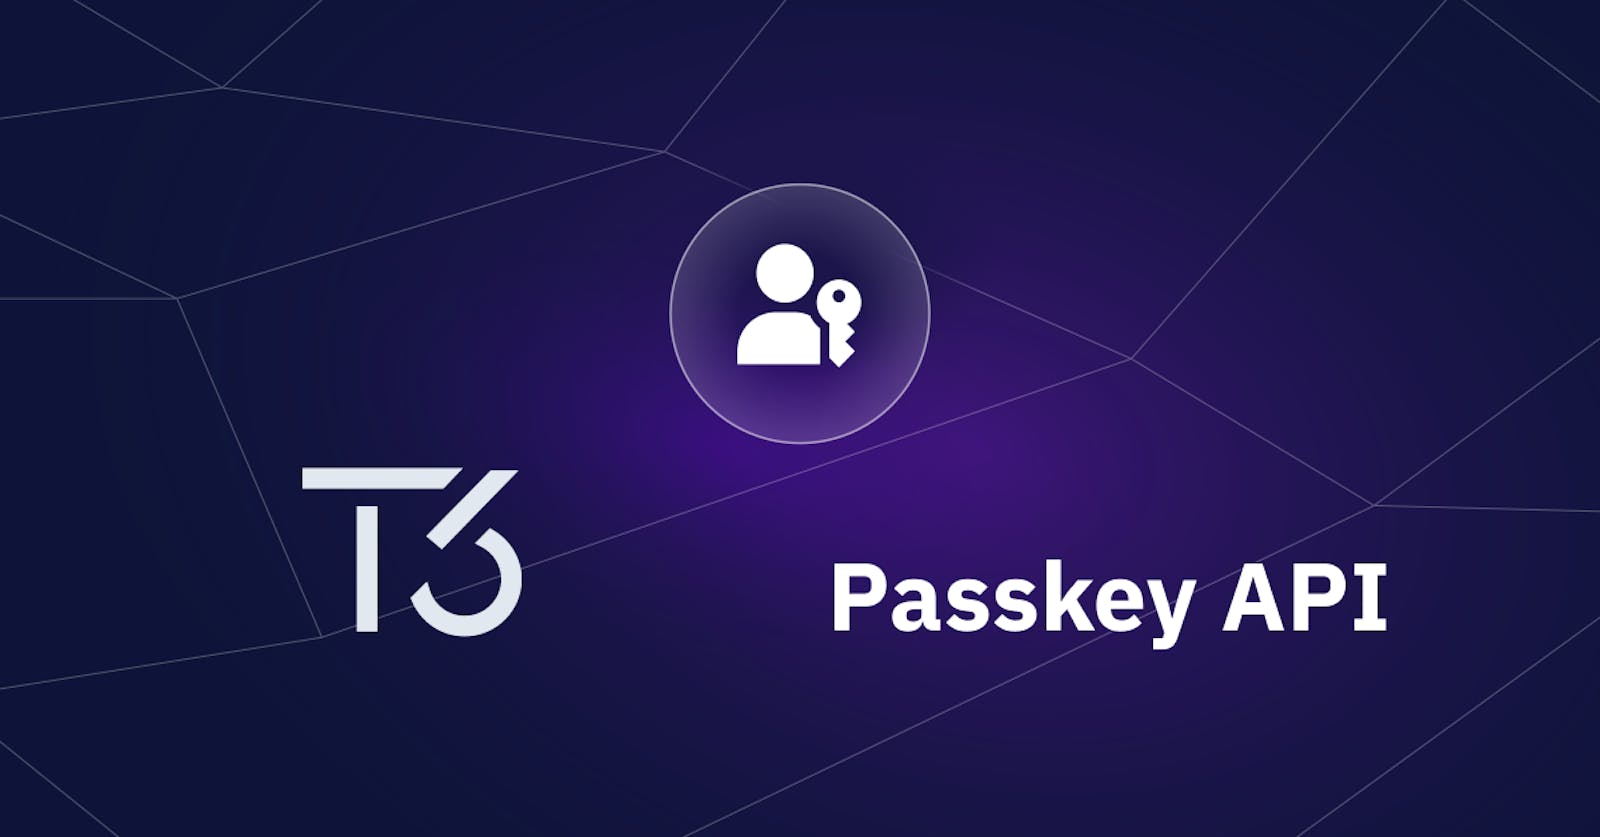 How to add a Passkey login to t3-stack with Hanko?